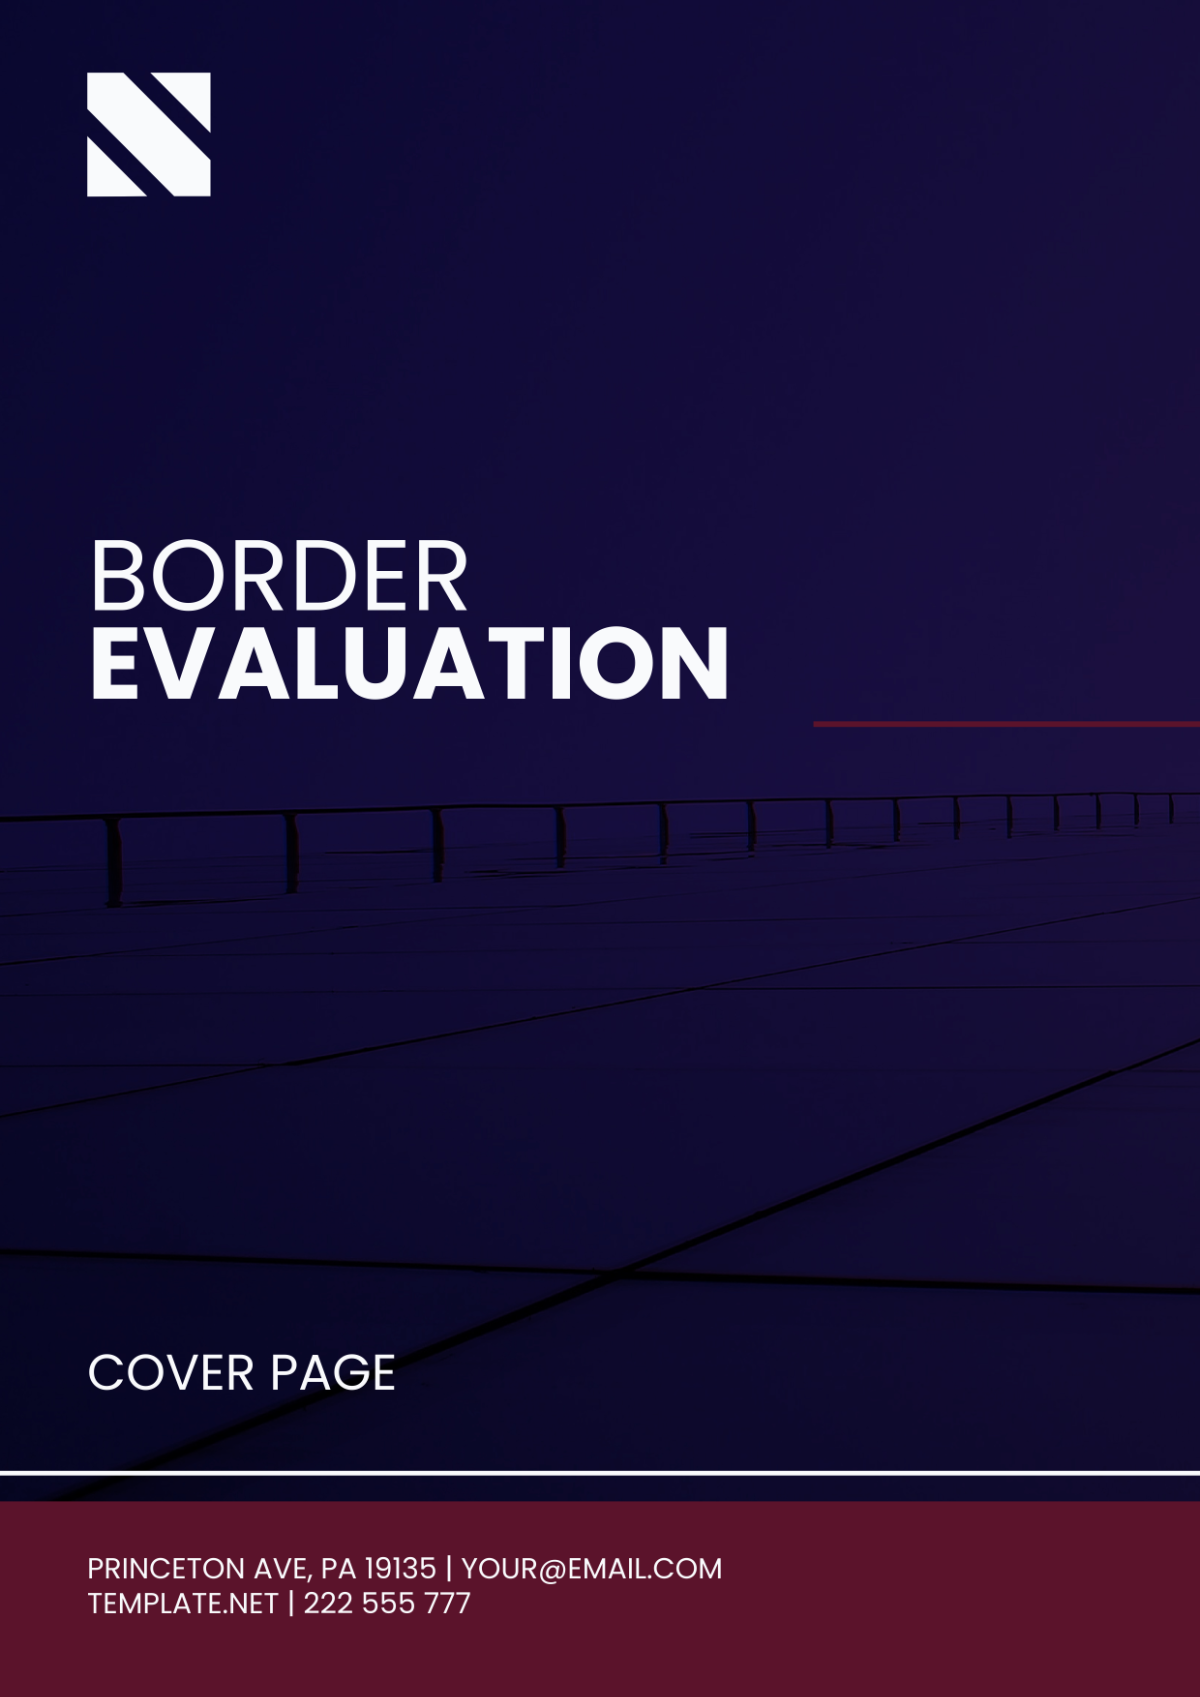 Border Evaluation Cover Page Template